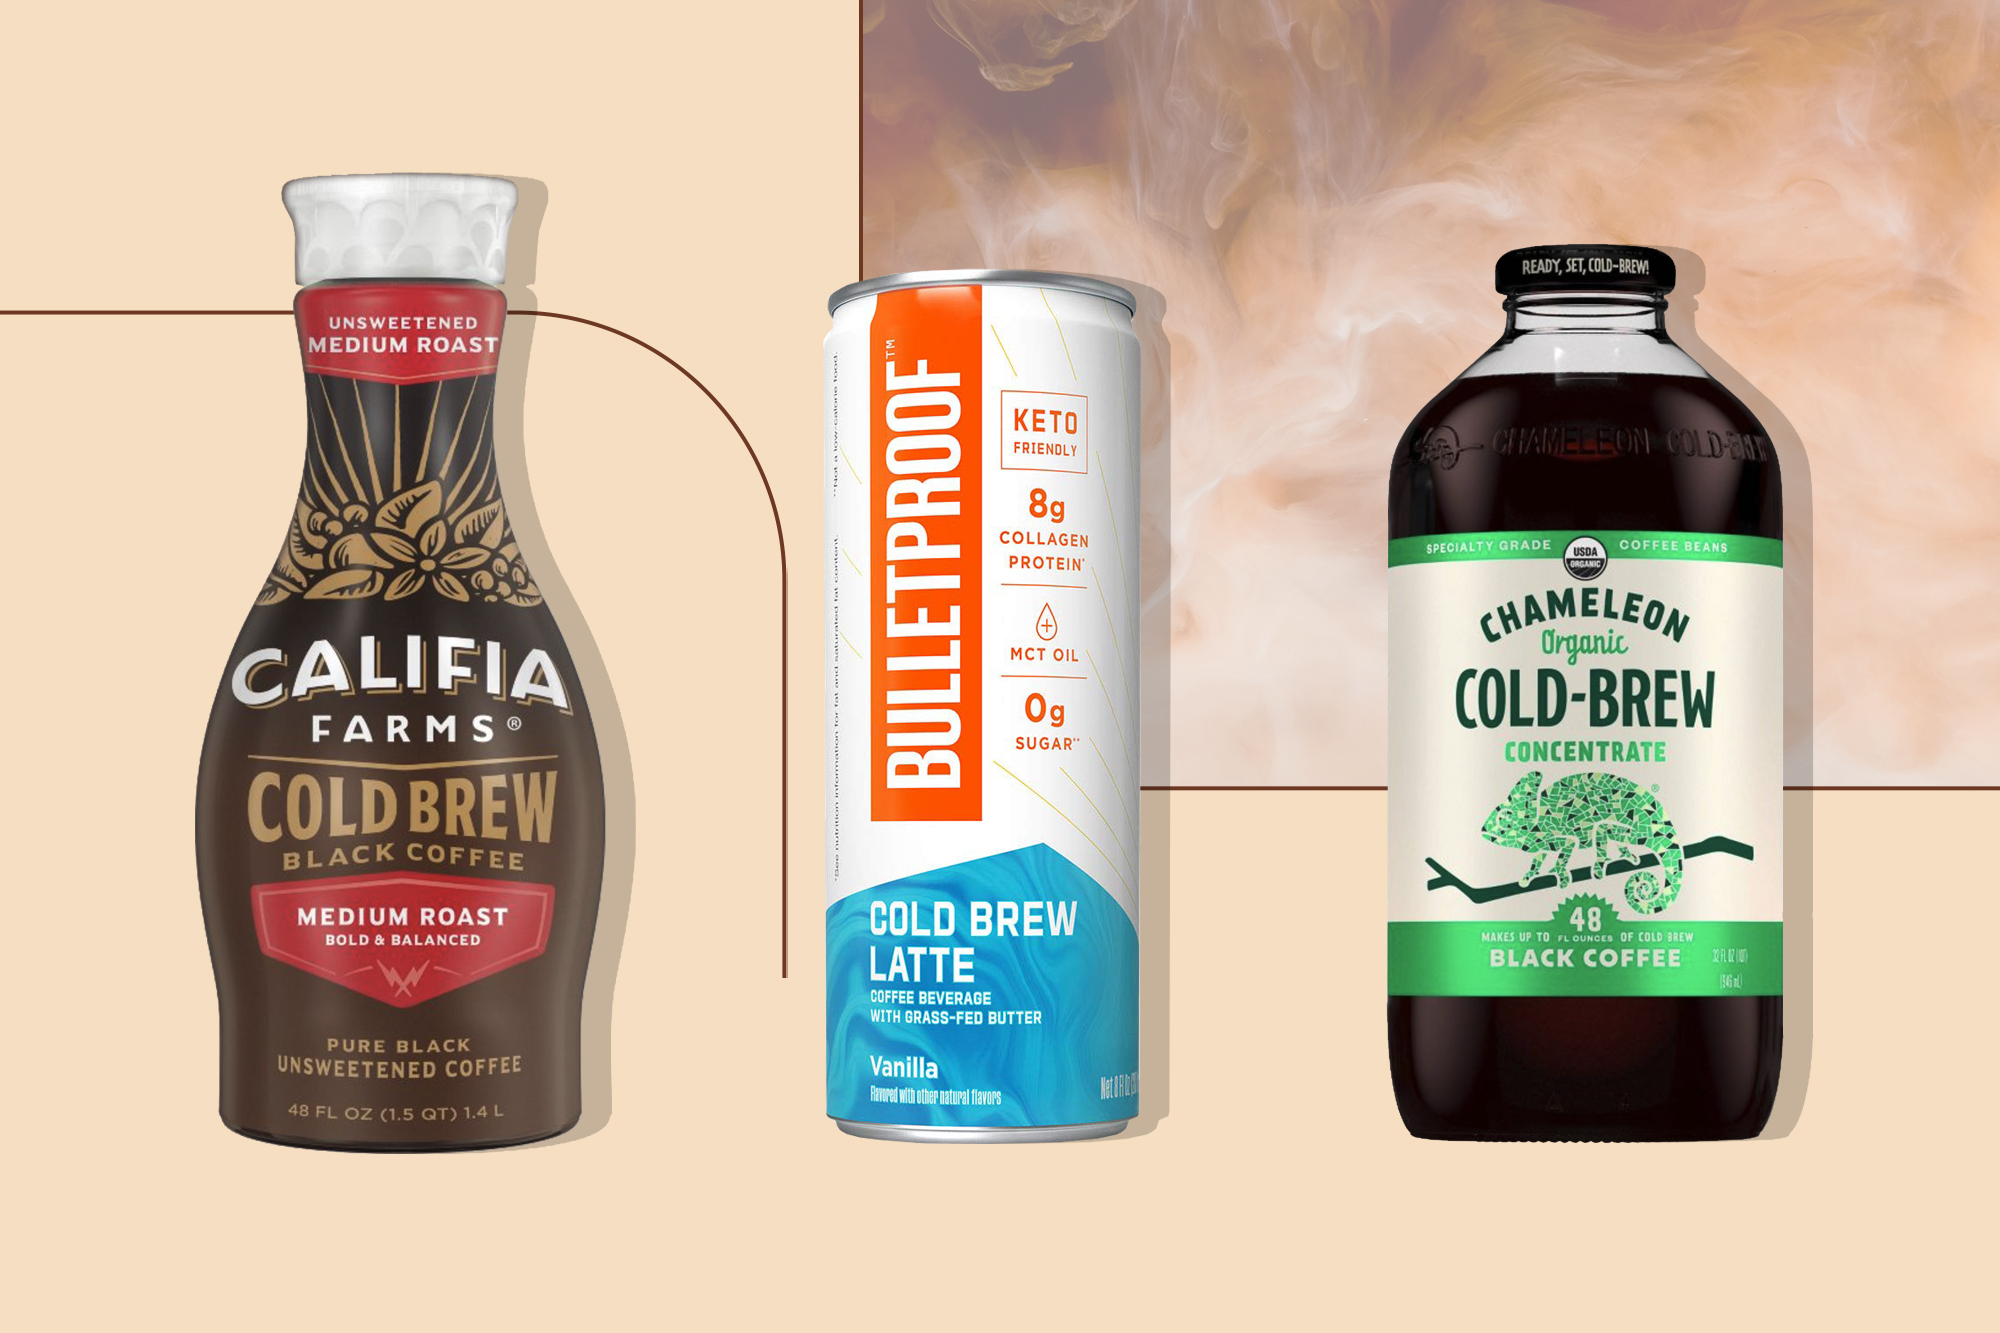 Try These Cold Brew Coffee Options and Products - Muscle & Fitness